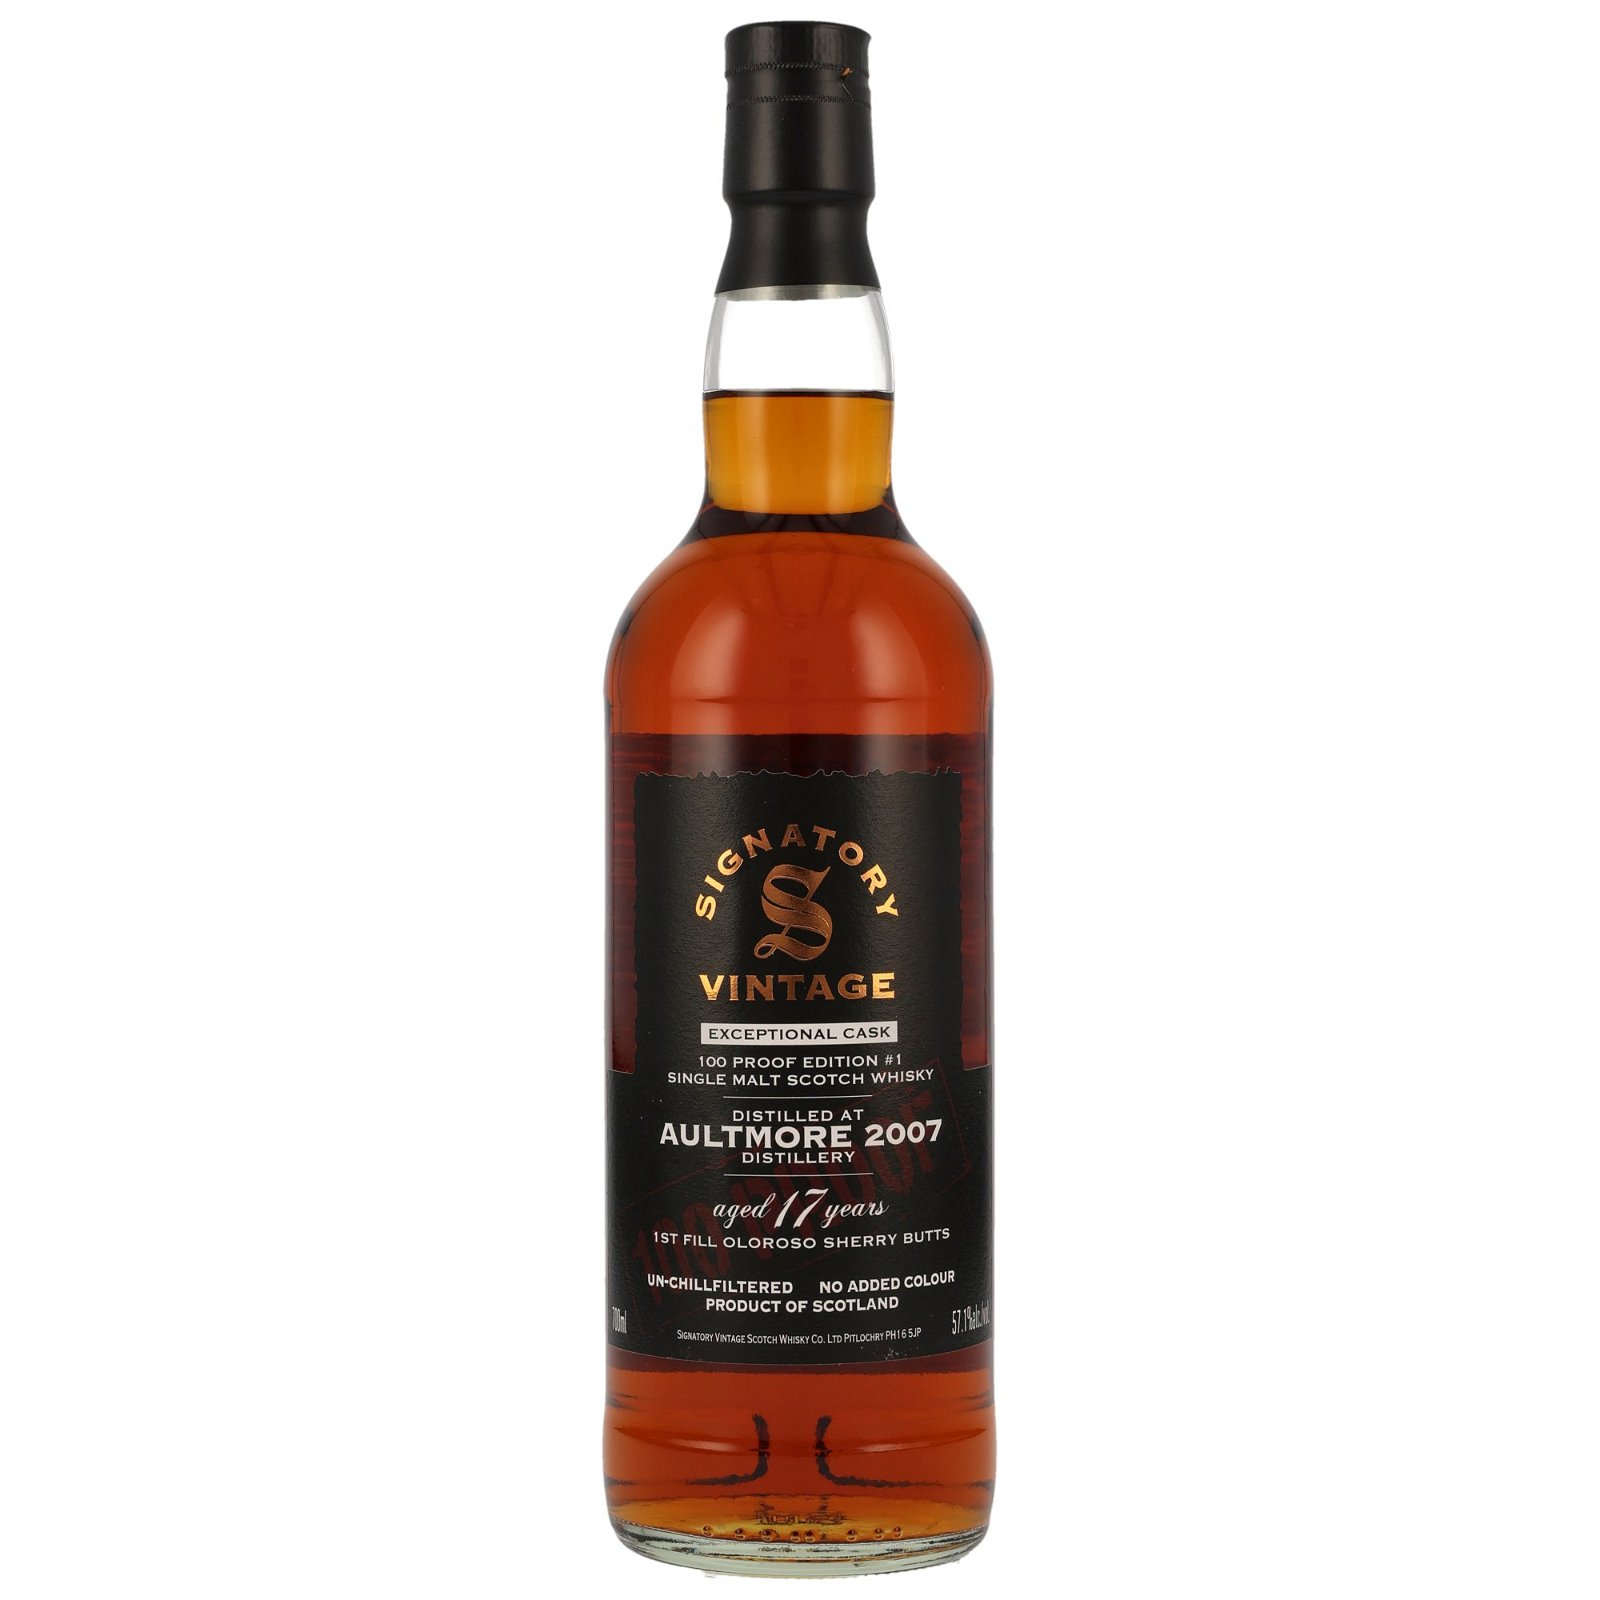 Aultmore 2007 - 17 Jahre 1st Fill Oloroso Sherry Butts 100 Proof Exceptional Cask Edition #1 (Signatory)